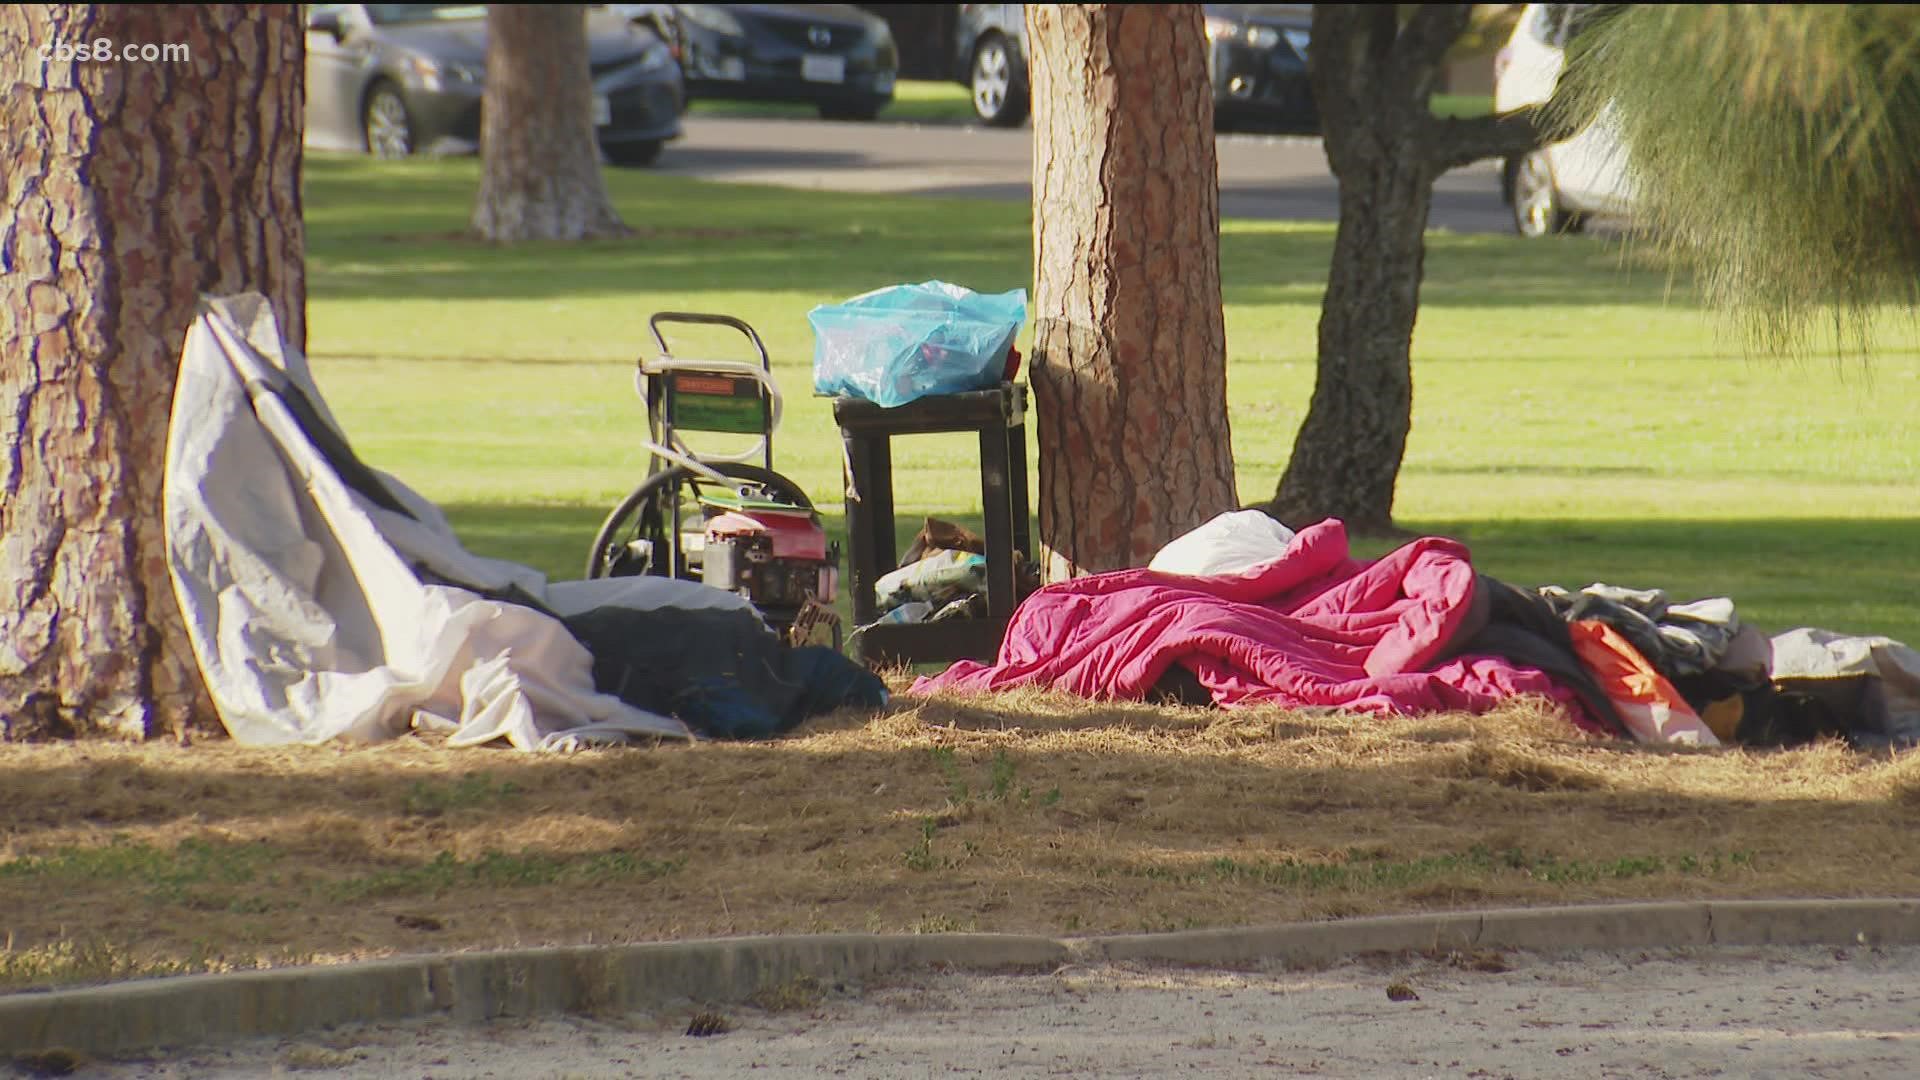 Residents near Balboa Park tried to get the attention of city leaders for months. CBS 8 worked to find out what's taking the city so long to clean up the mess.